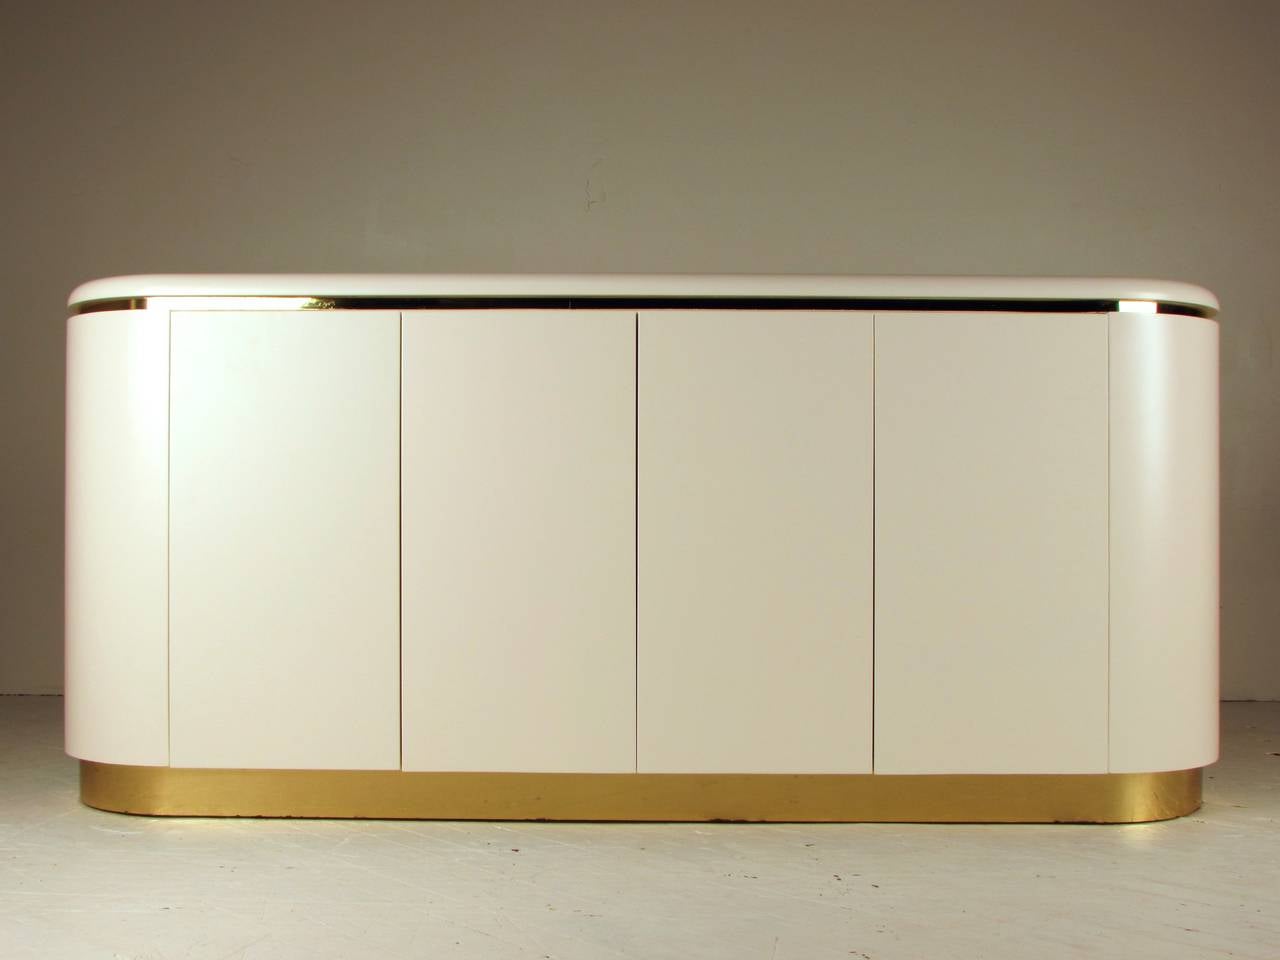 1970s glam curved buffet or credenza by Mastercraft. Impeccable quality and seriously heavy. The finish was quite dated, so we had this piece re-lacquered in Dover White, the perfect shade of off-white! 

Brass is in very good vintage condition